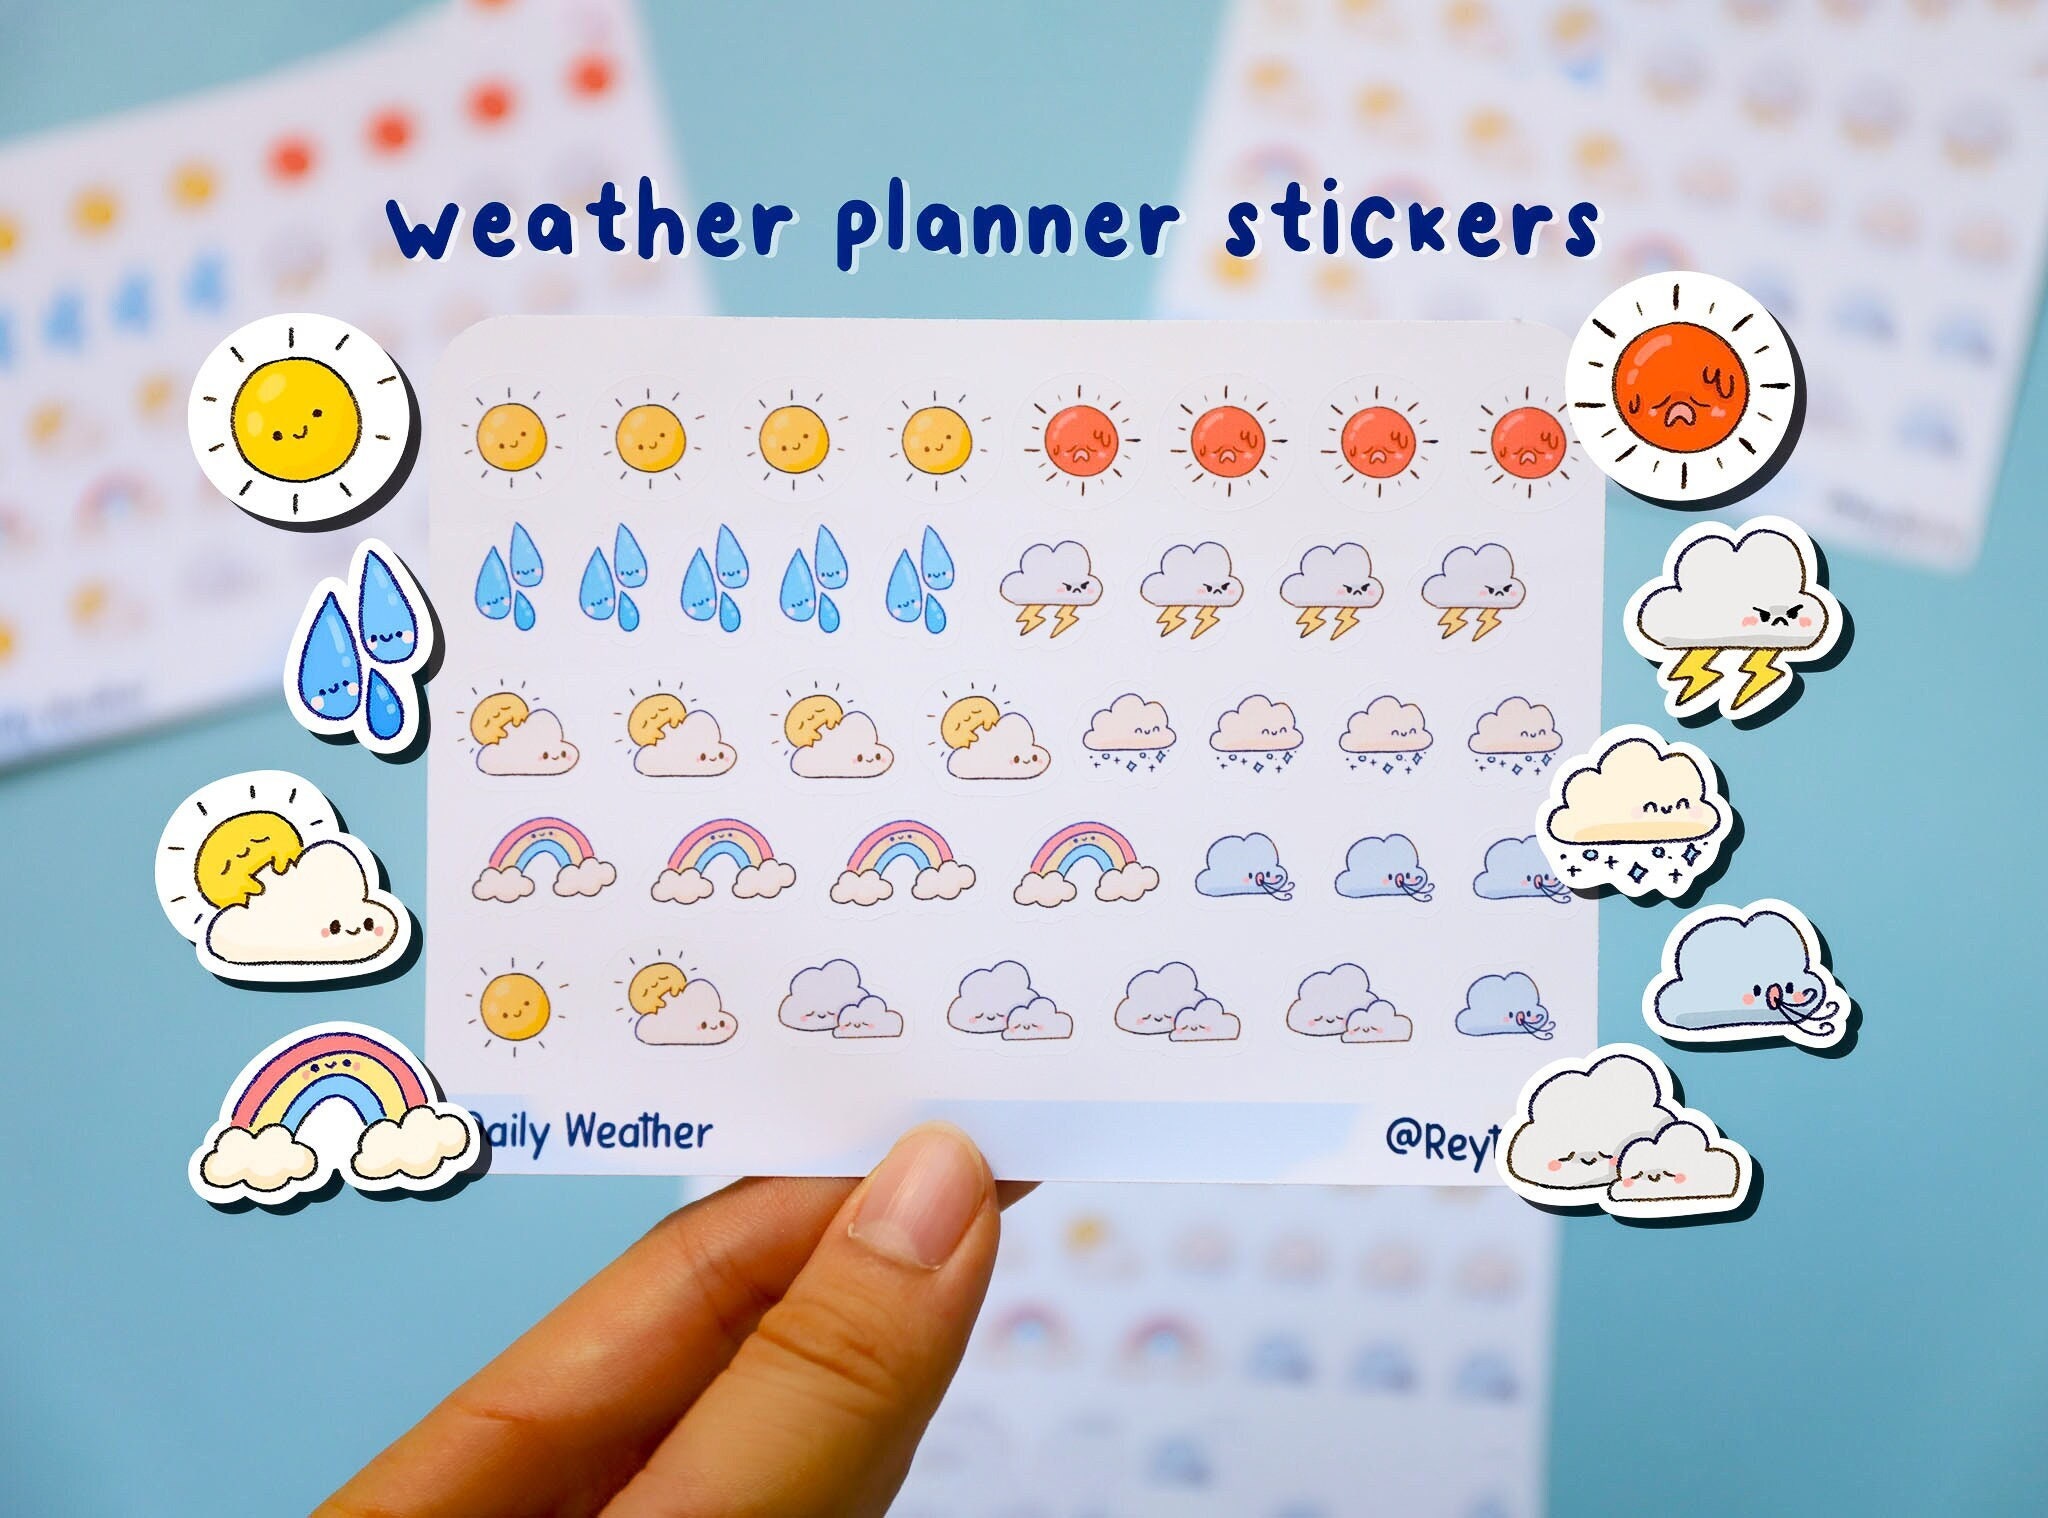 I105 - WEATHER STICKERS - weather planner stickers - for planner –  StickerMama